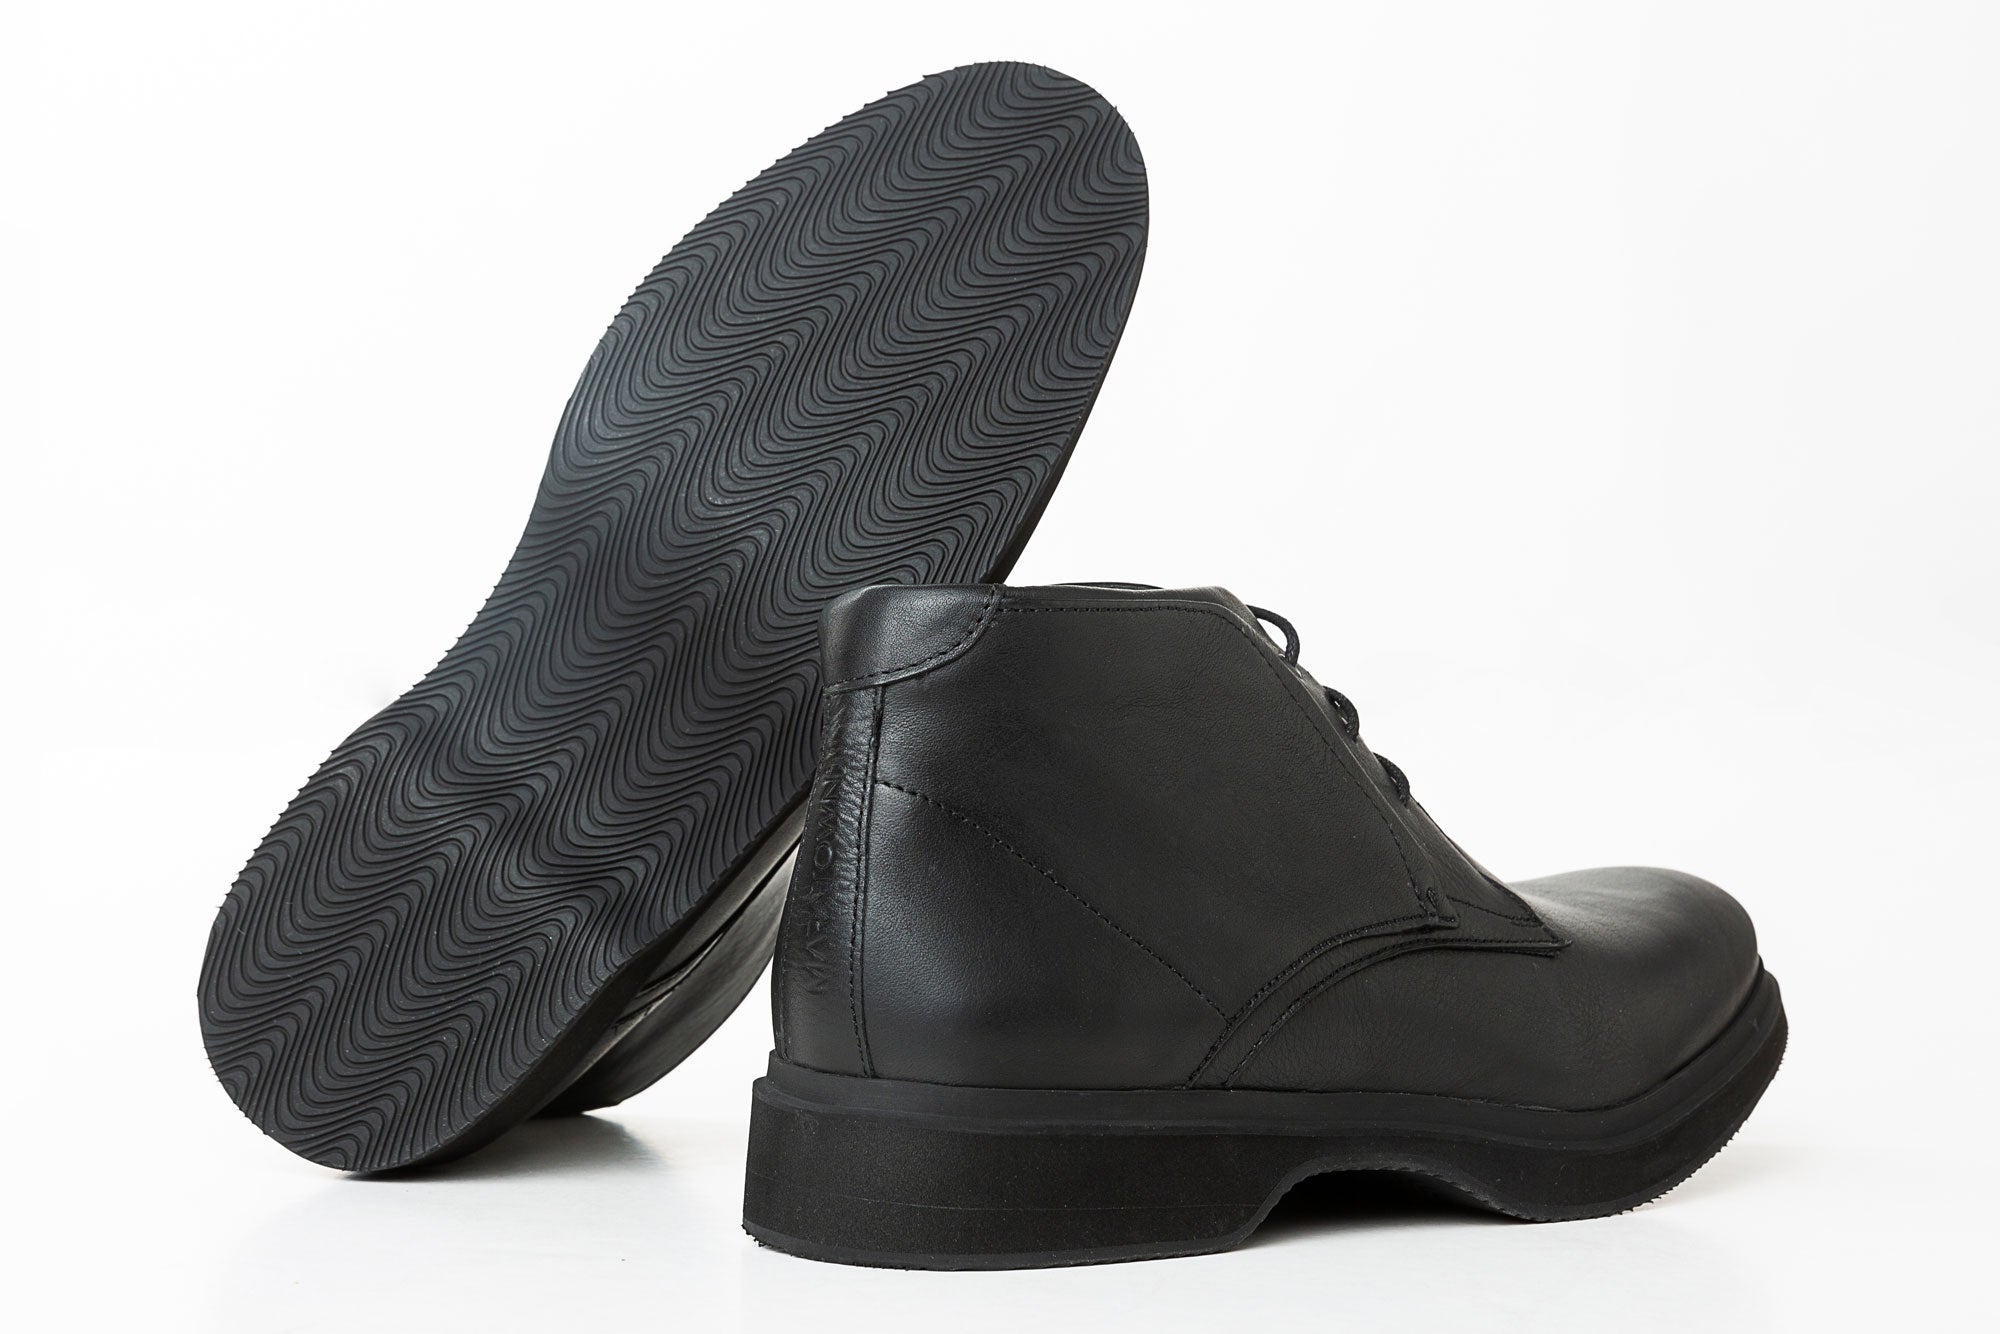 Most Comfortable Mens Boots For Work - MARATOWN - super cushioned sole - most comfortable shoes